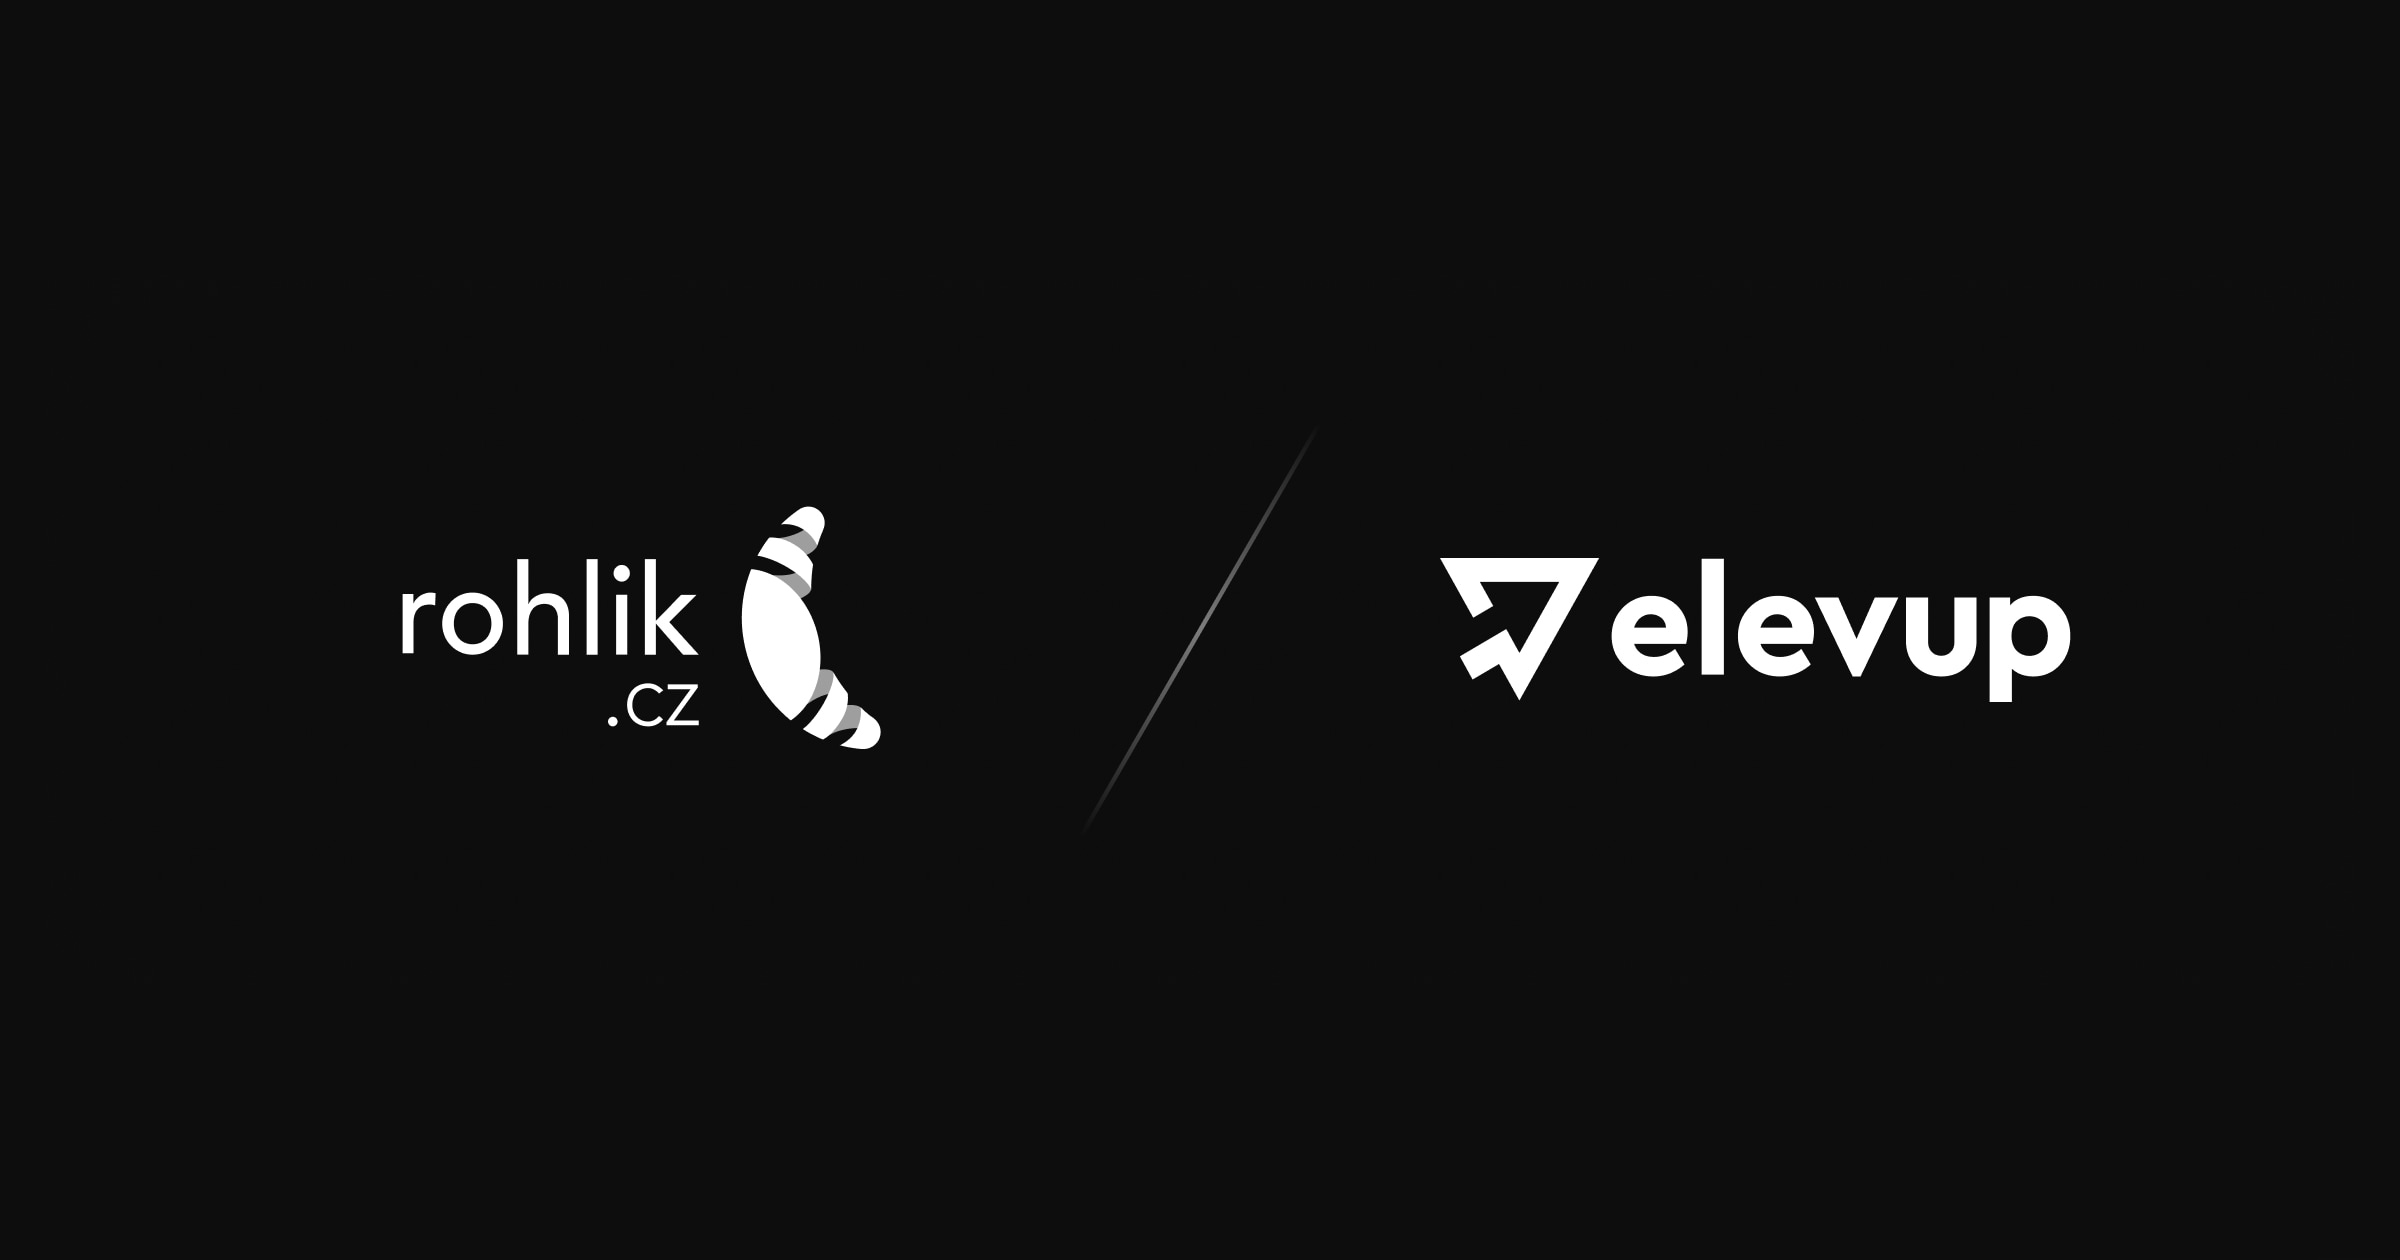 Rohlík.cz, a renowned Czech online grocery store, signs up with elevup